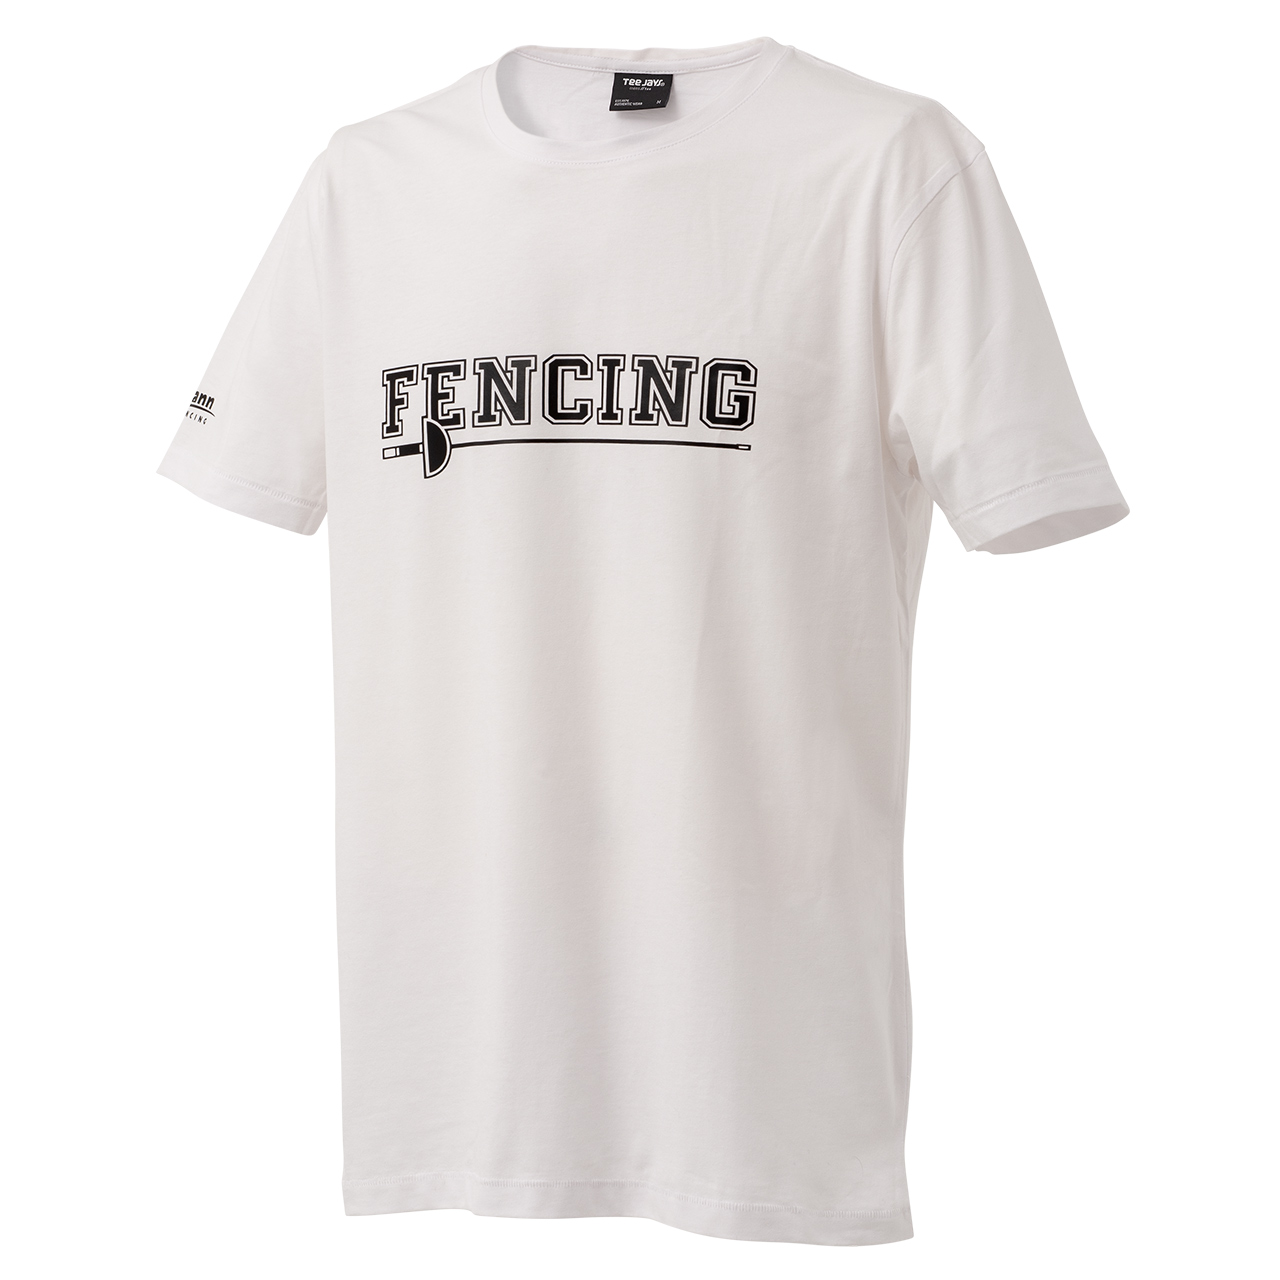 T-shirt "Fencing", white